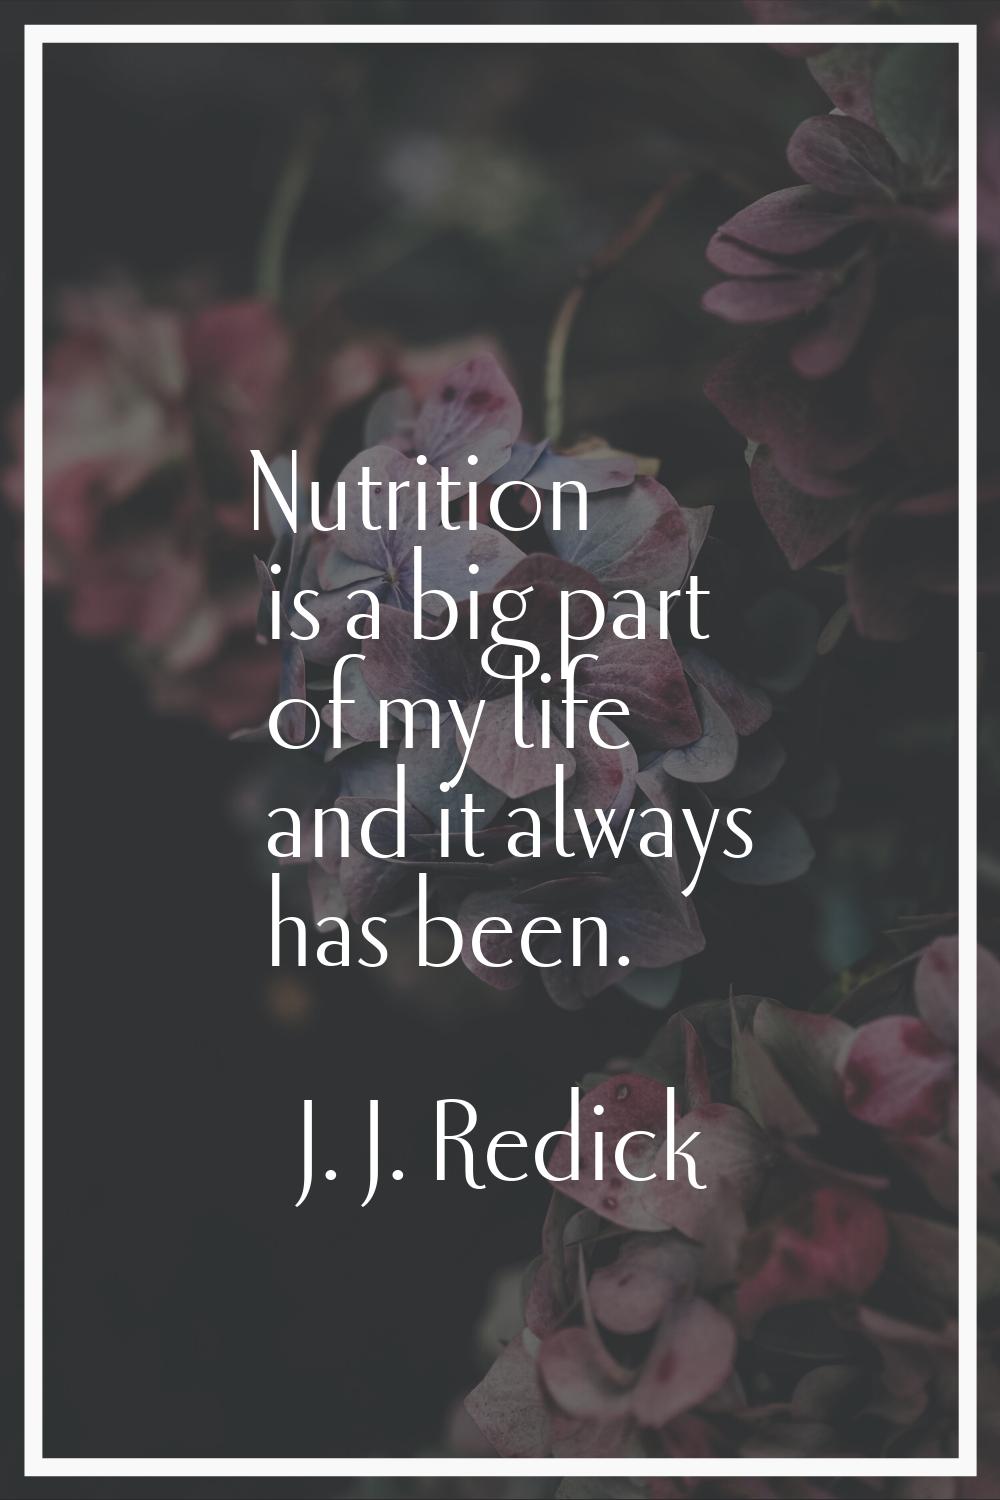 Nutrition is a big part of my life and it always has been.